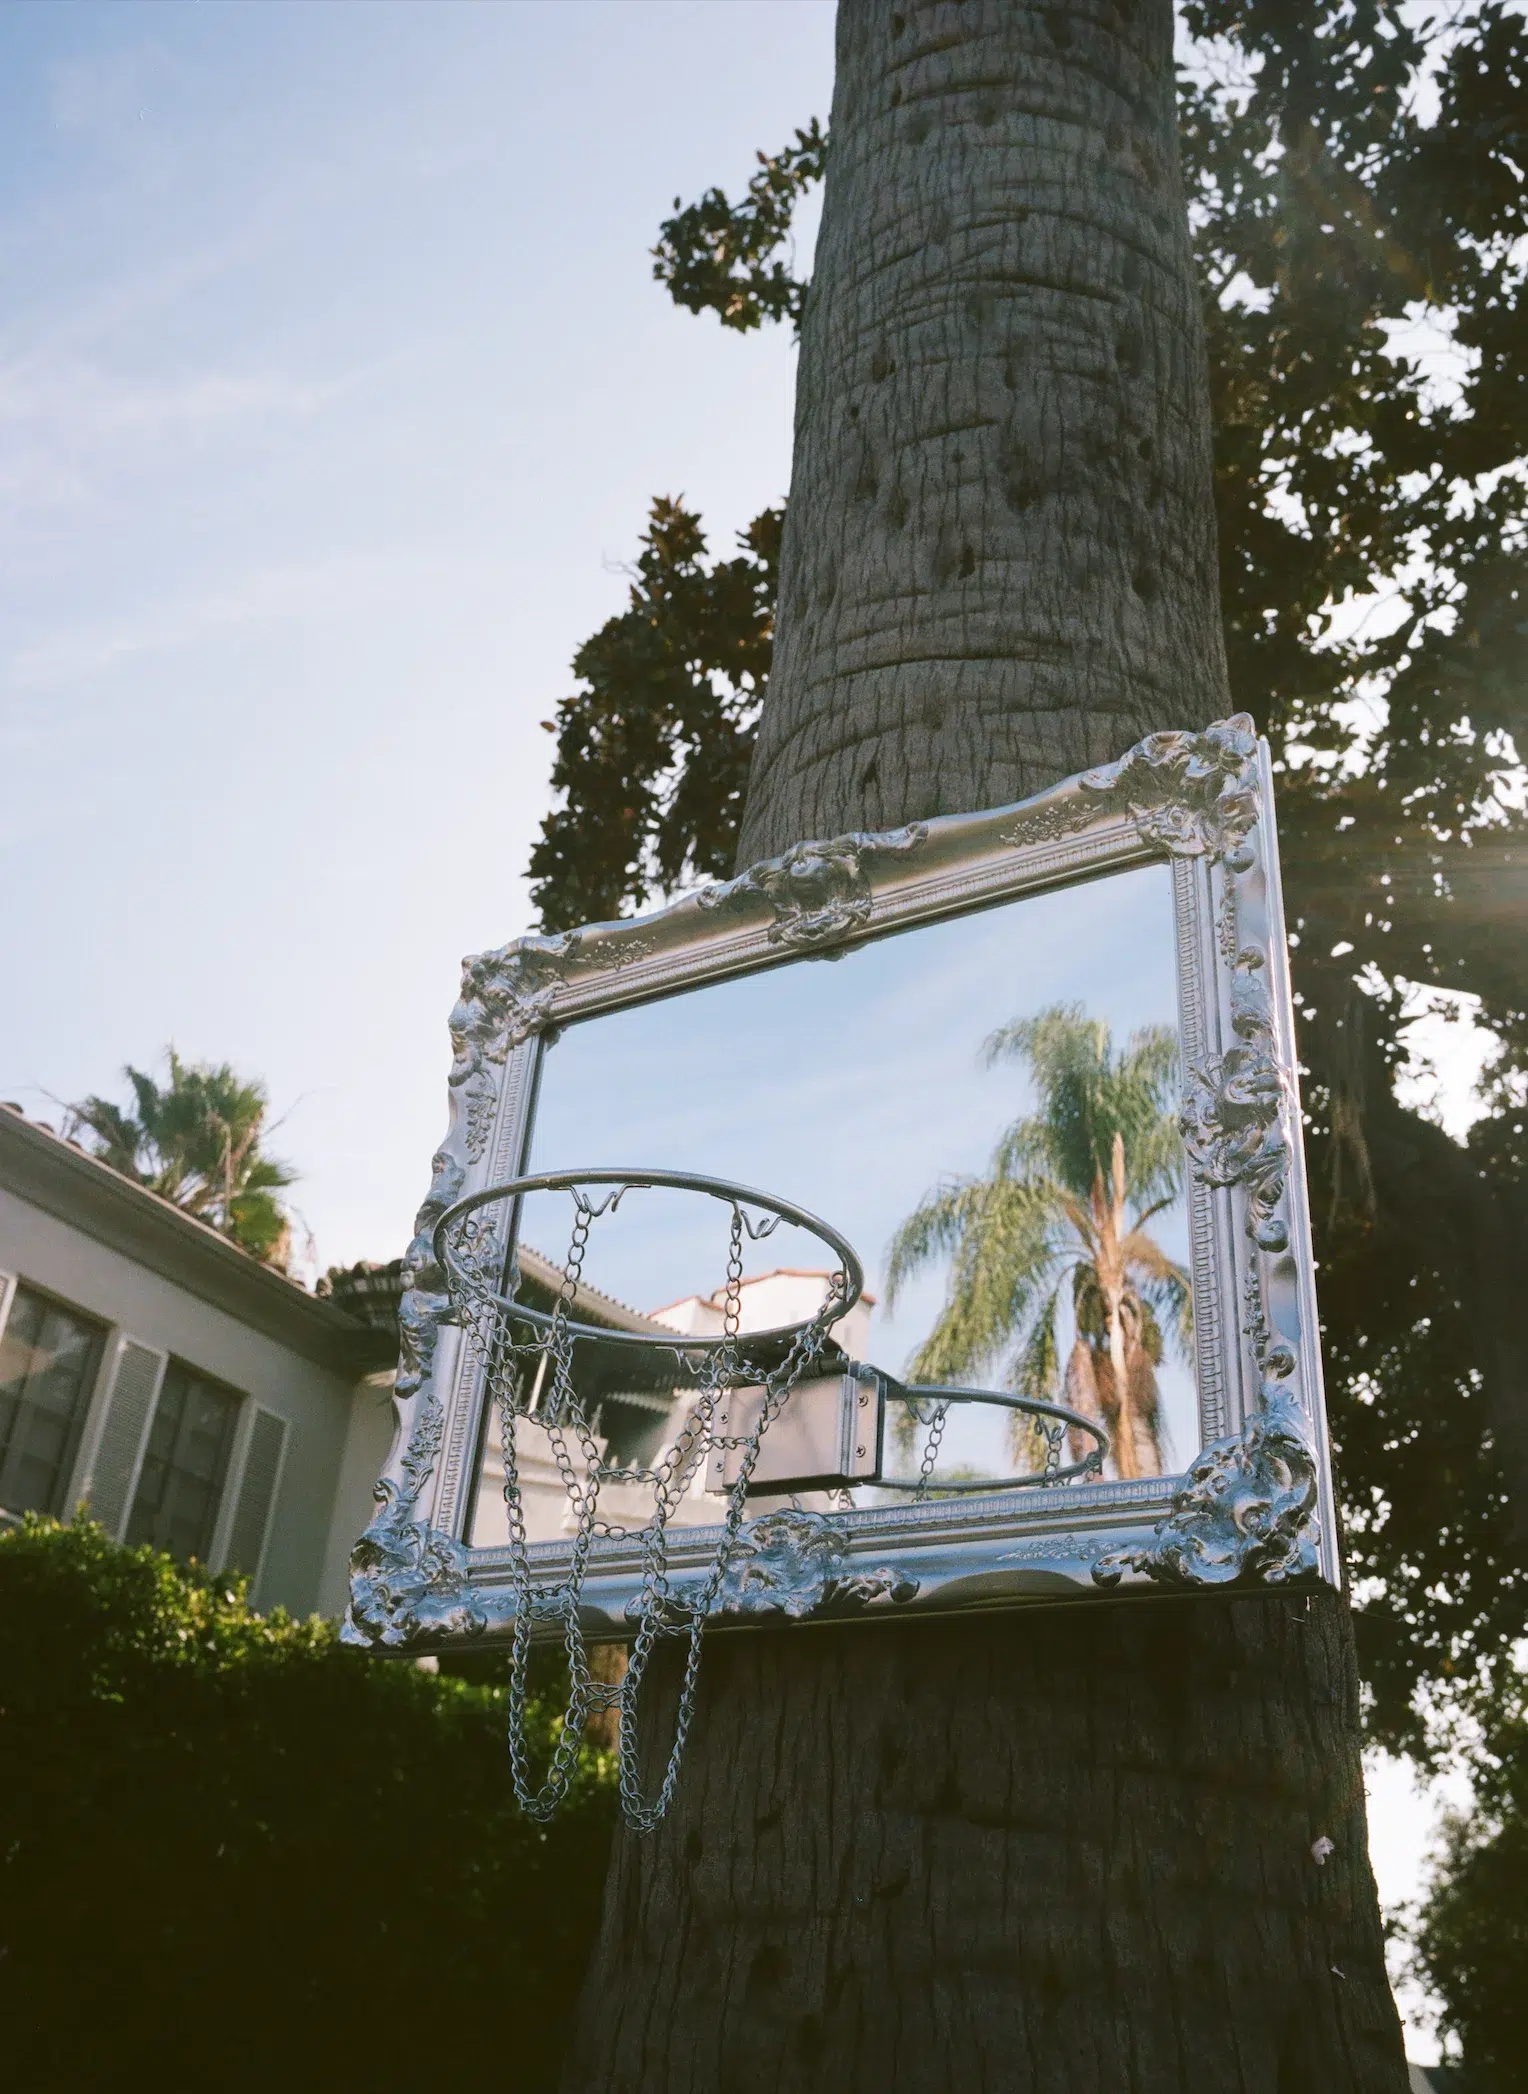 A mirror hanging on a tree in front of a house.